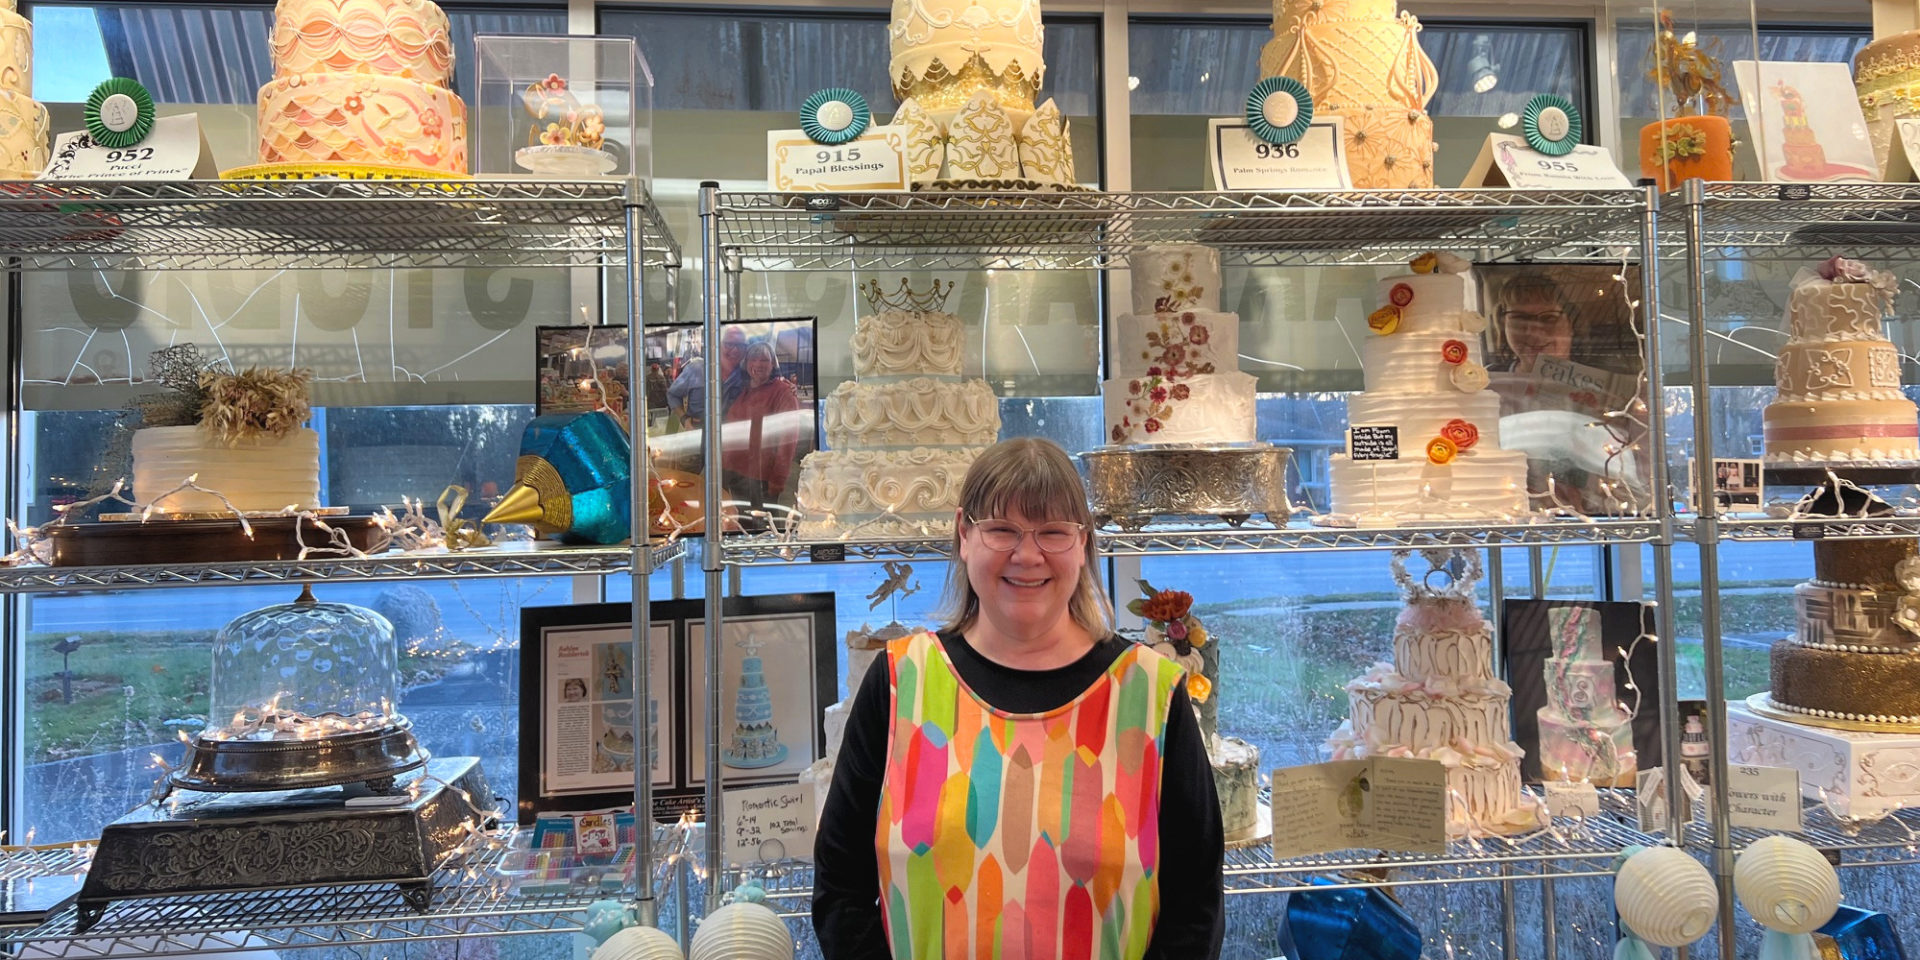 Ashlee Freeburg, The Cake Artist of The Cake Artist's Studio in Champaign, stands in front of many of her beautifully decorated cakes.